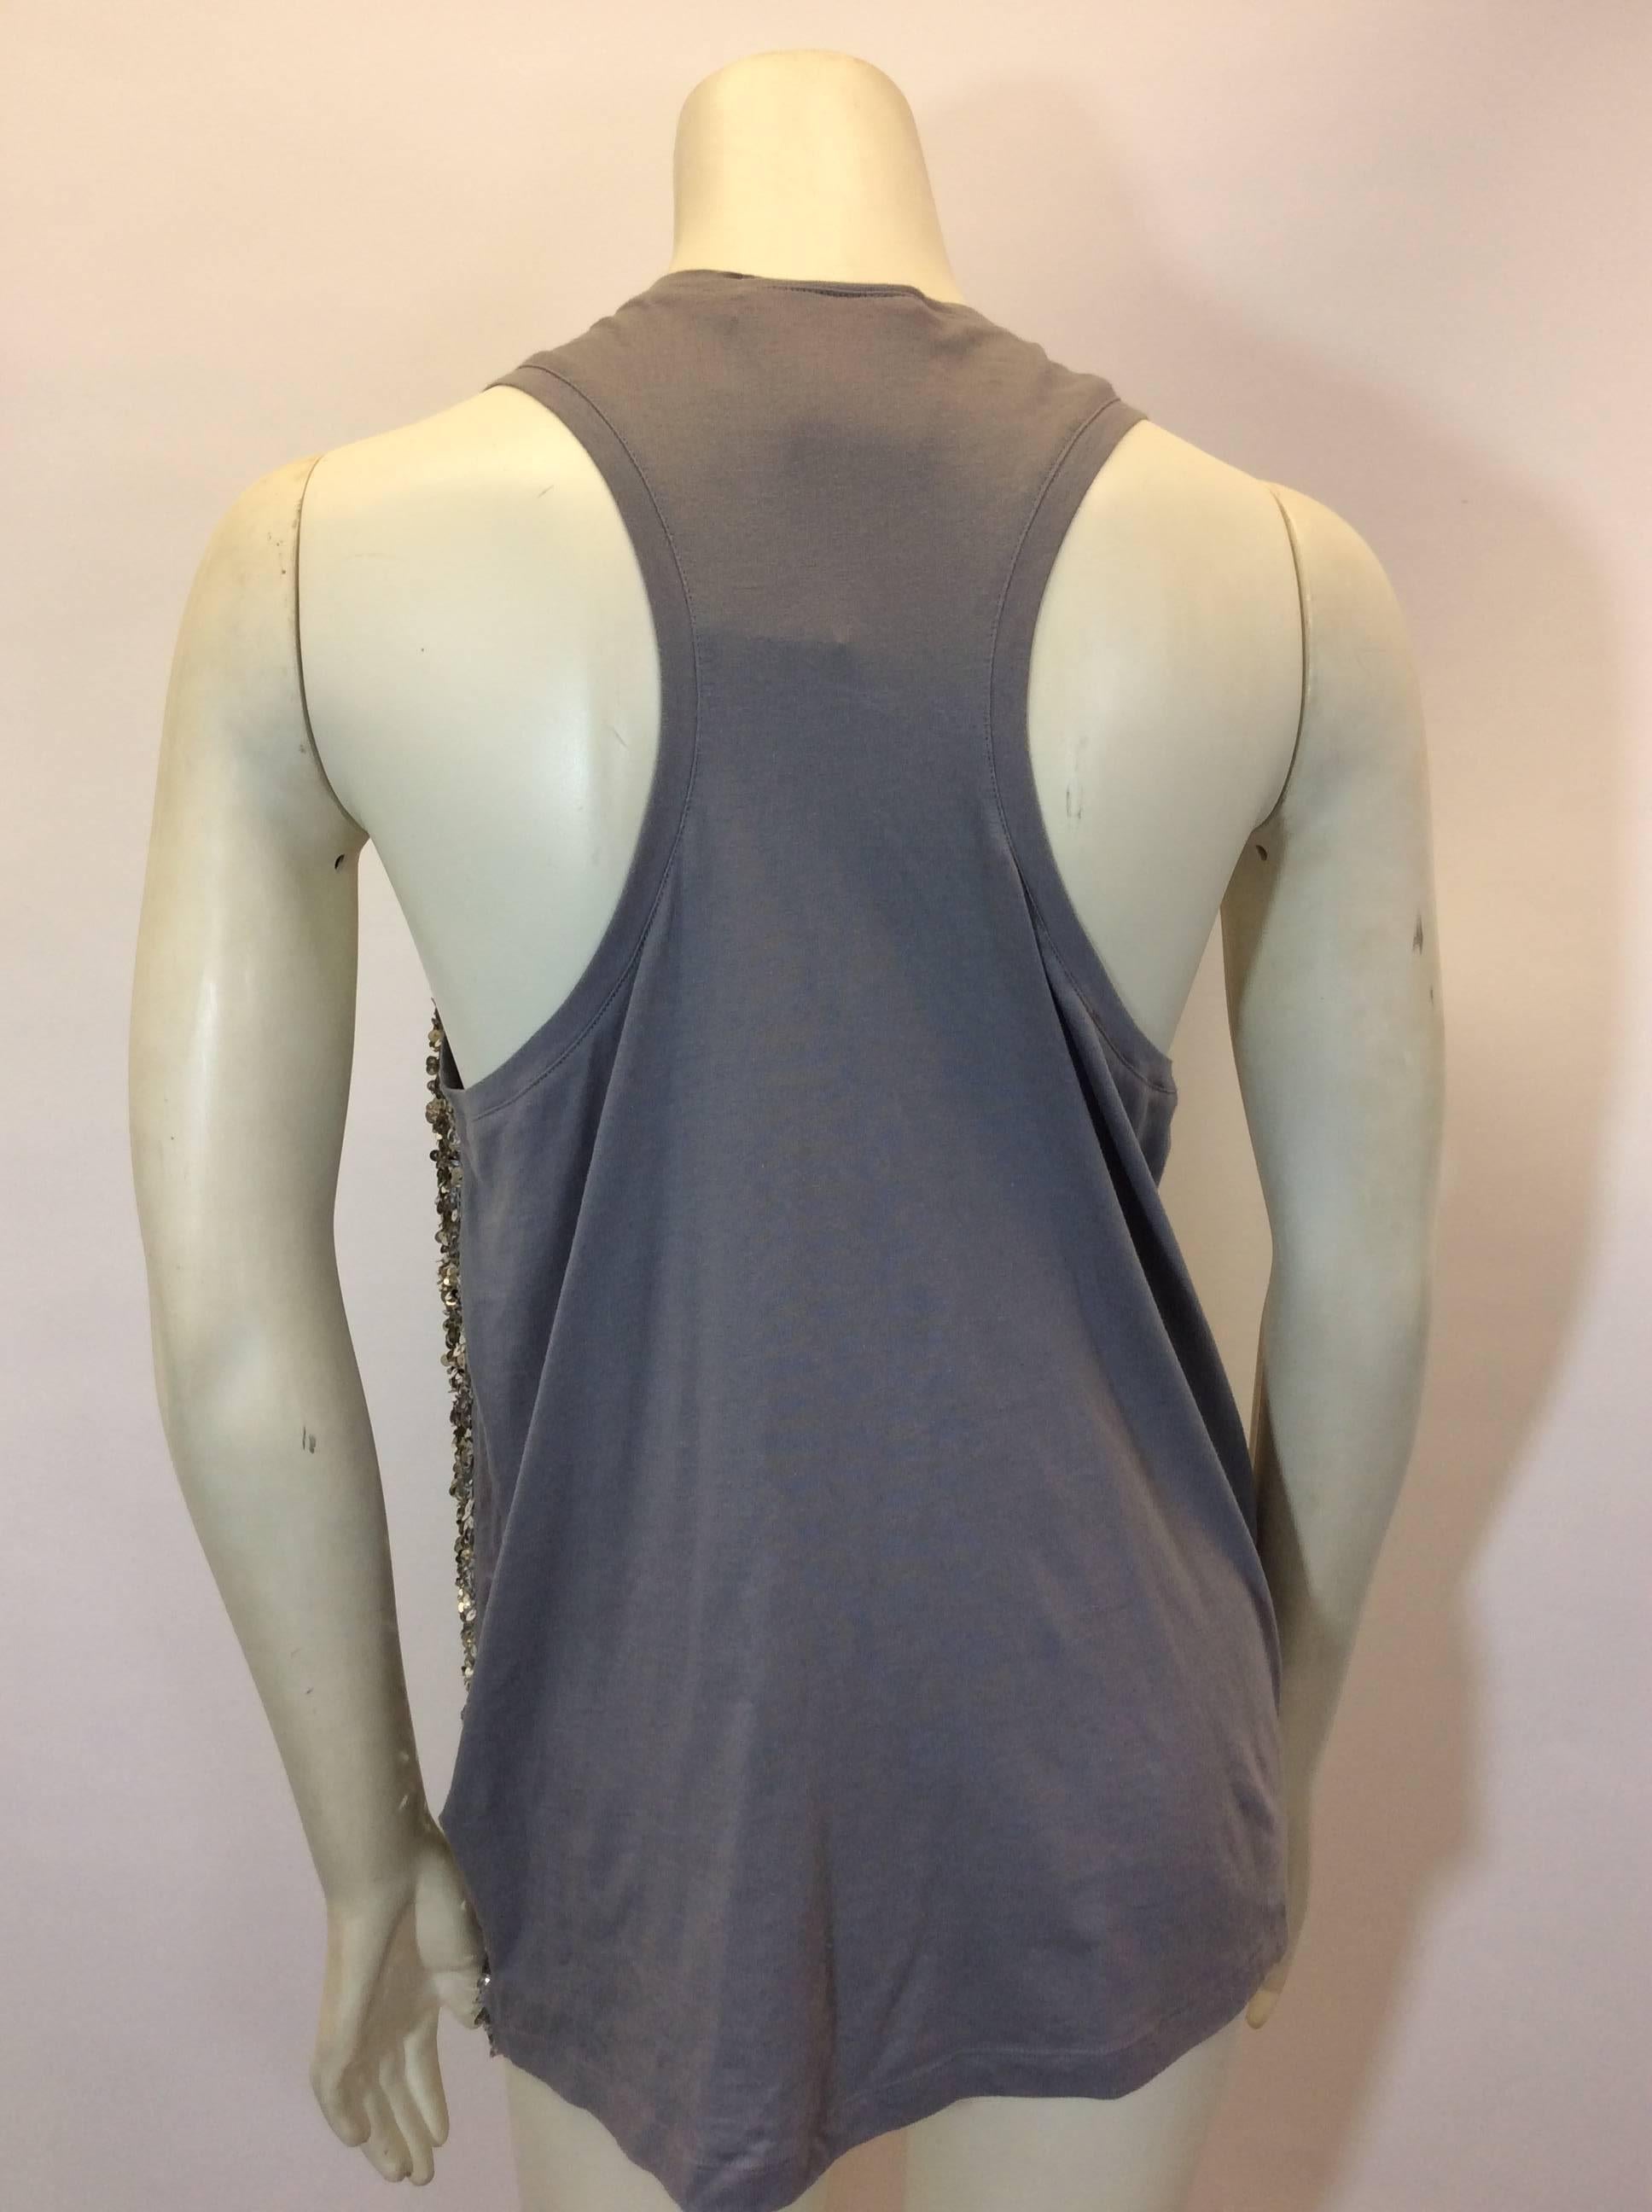 Stella McCartney Sequined Grey Tank In New Condition For Sale In Narberth, PA